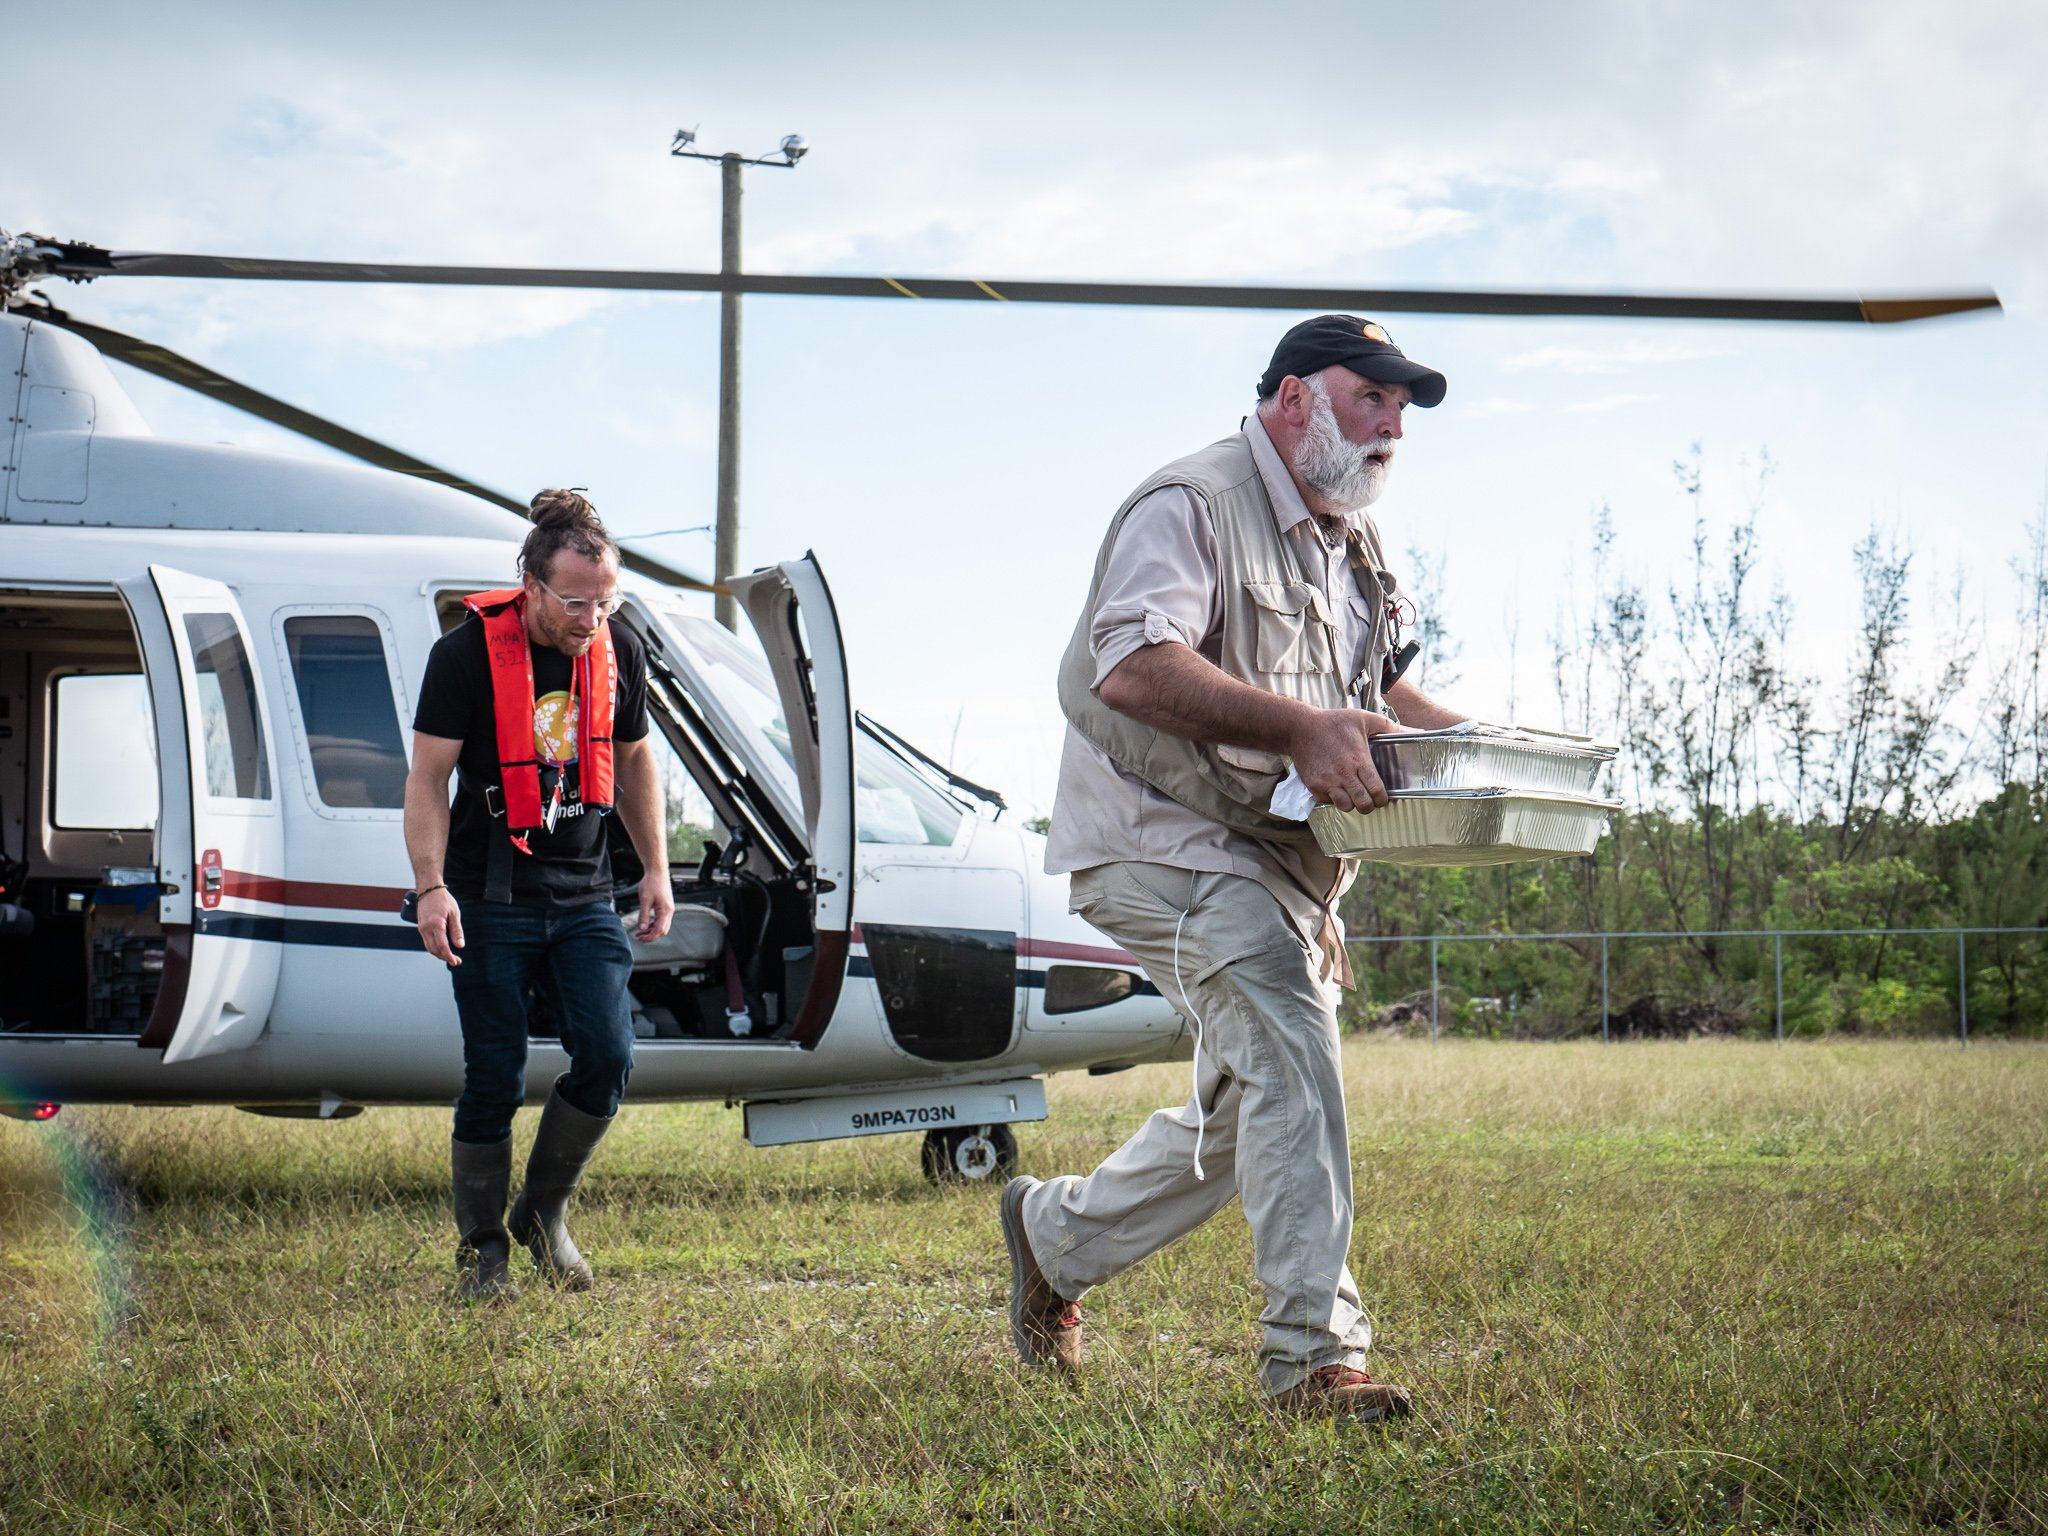 The chef with a hot meal and a helicopter in the Bahamas. Photo courtesy of World Central Kitchen.